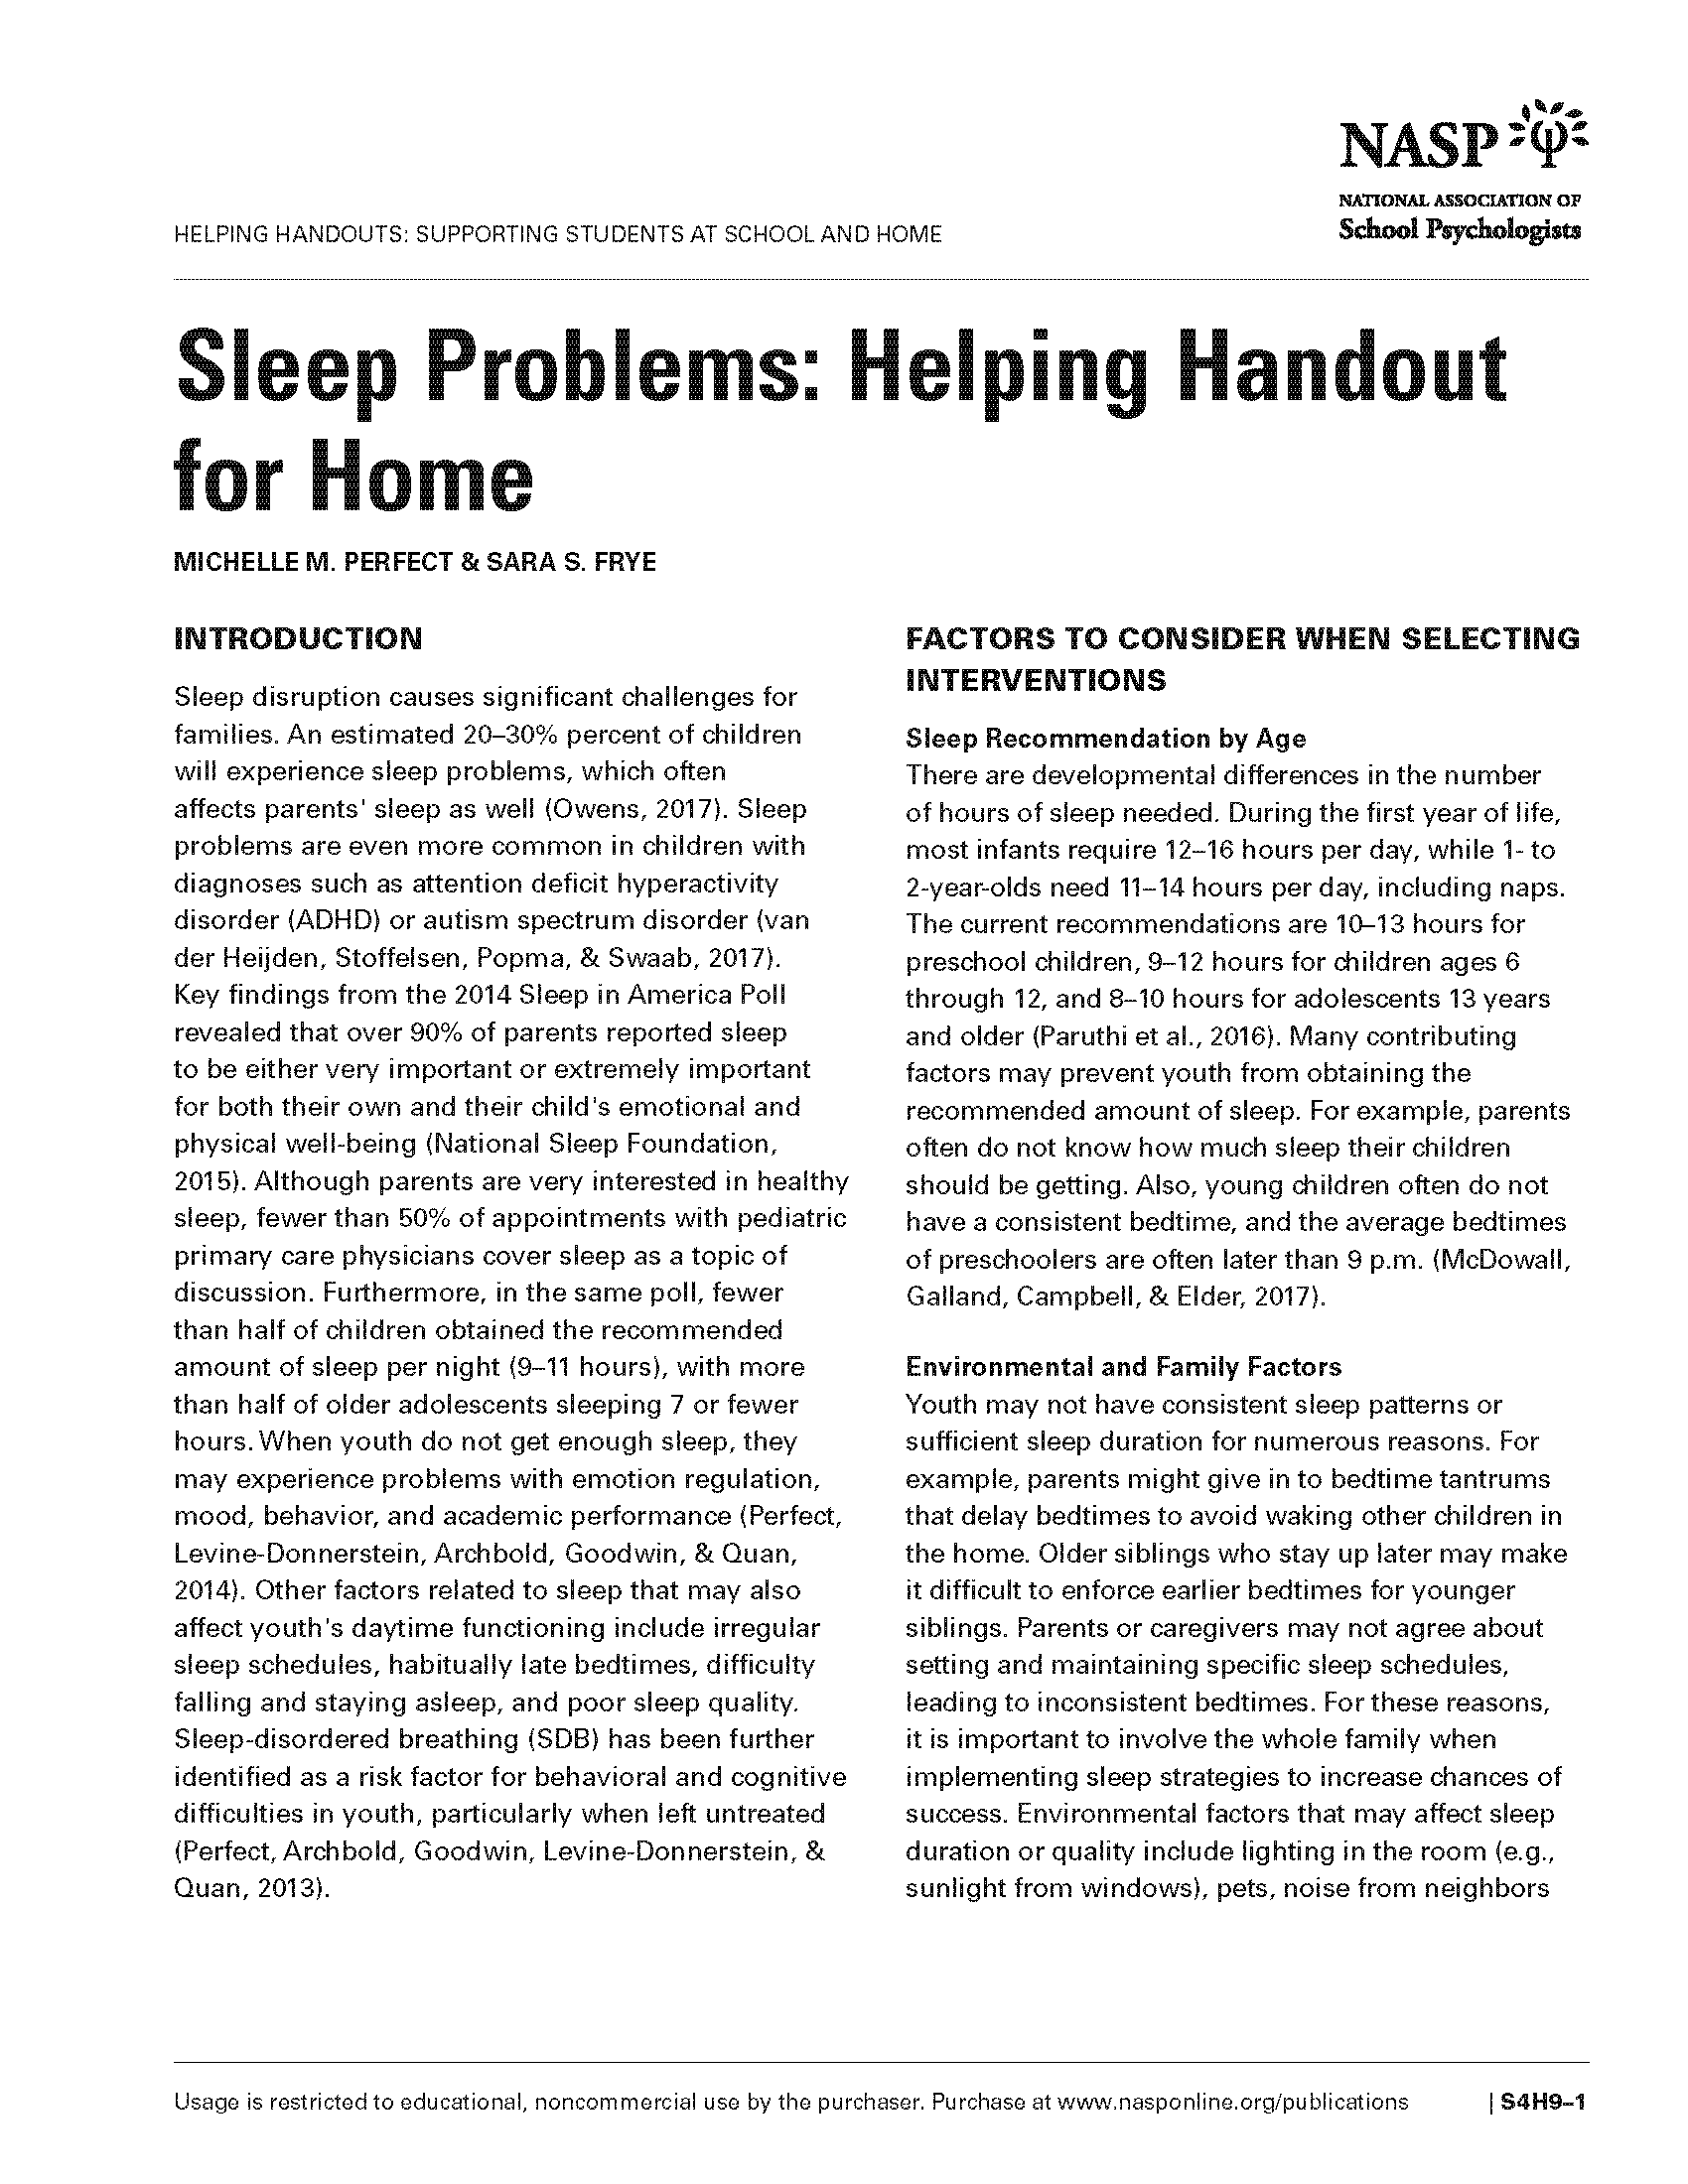 Sleep Problems: Helping Handout for Home 